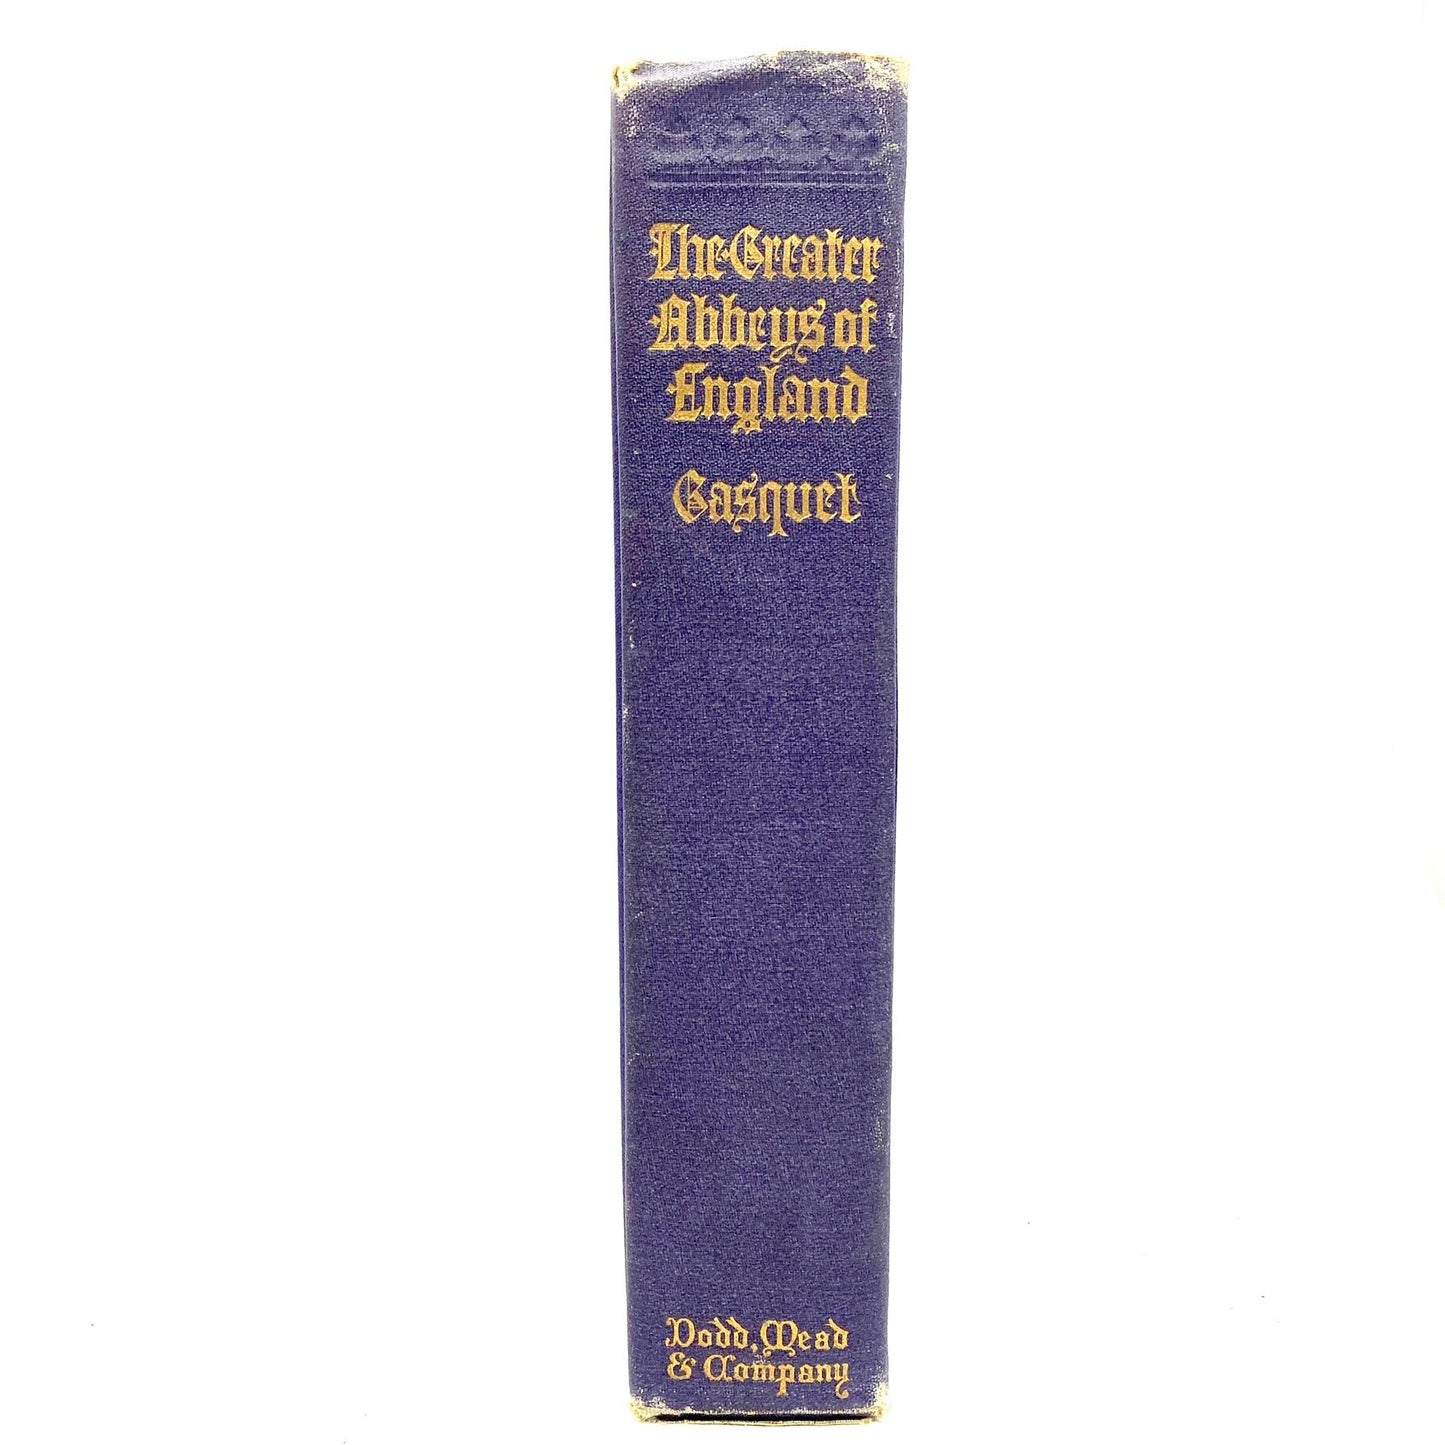 GASQUET, Abbot "The Greater Abbeys of England" [Dodd, Mead & Co, 1912] - Buzz Bookstore